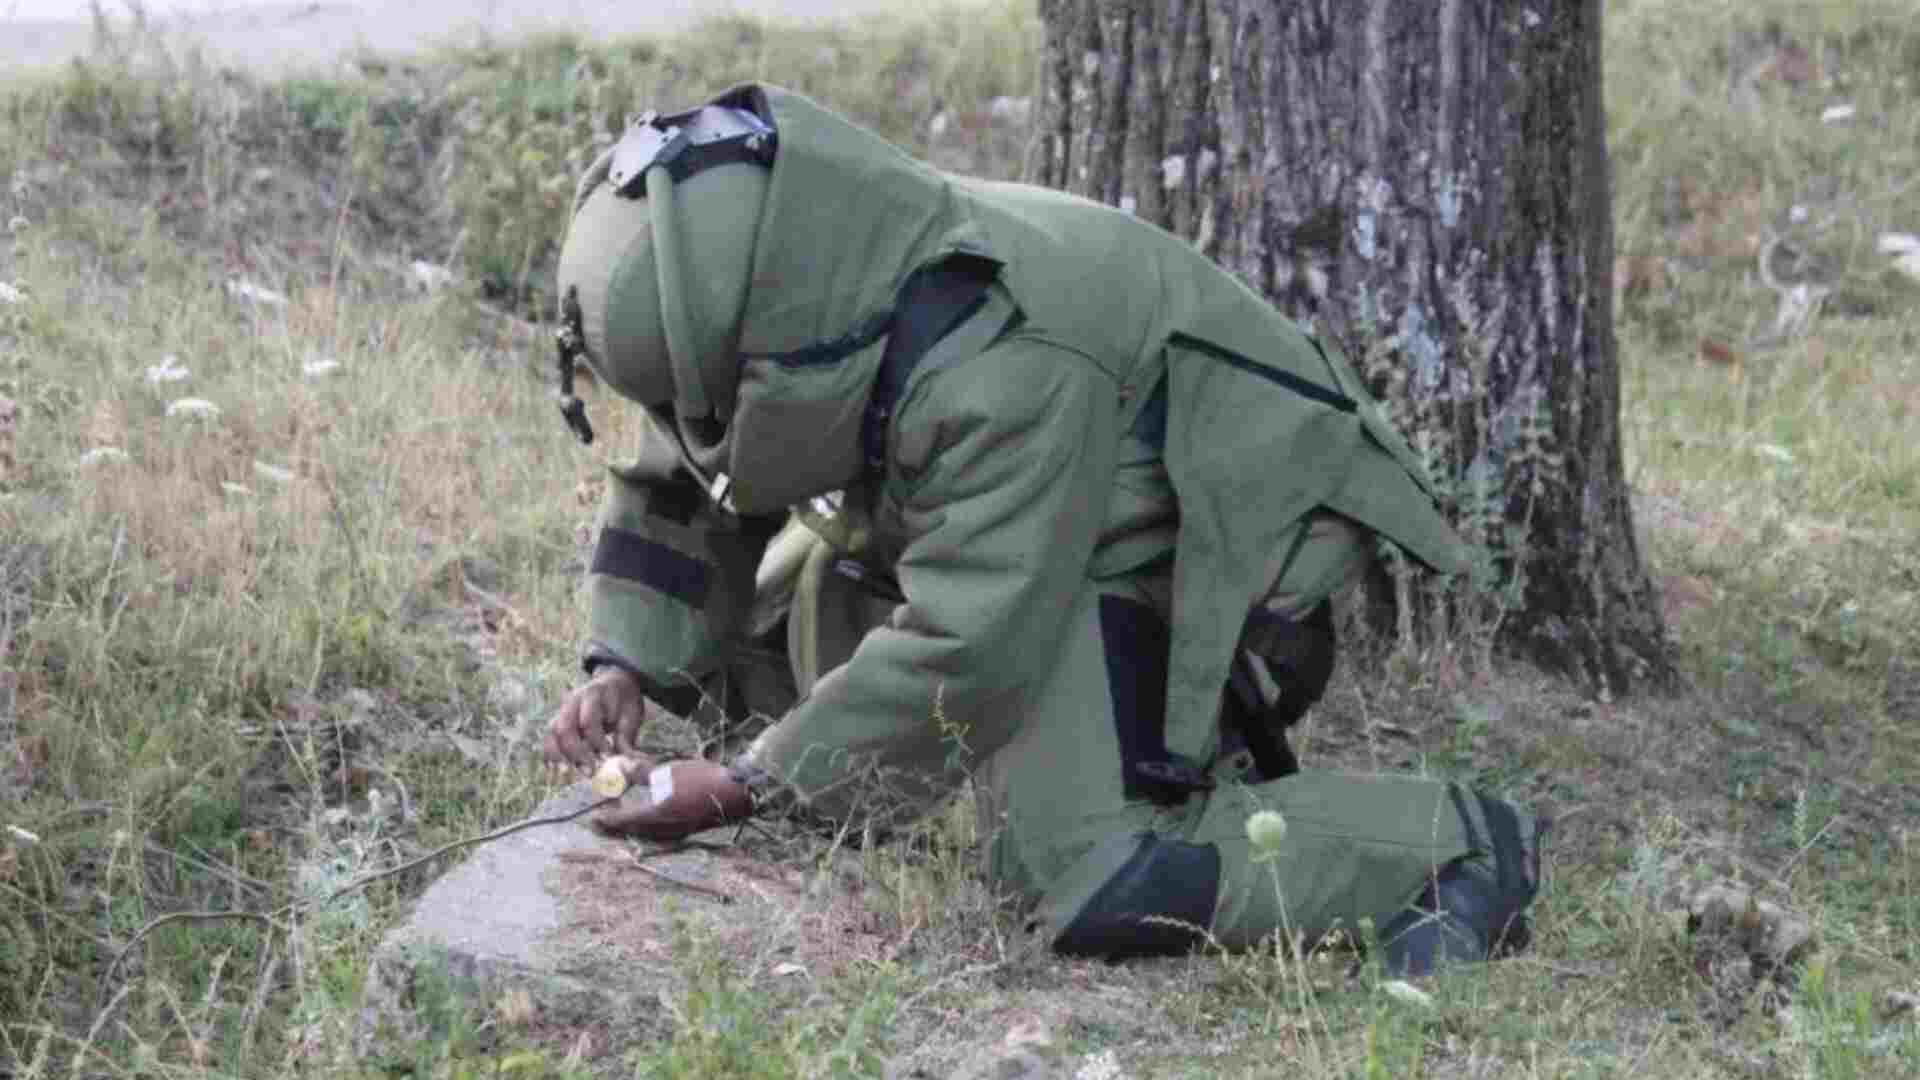 Security Forces Dispel Major catastrophe, recover IED in J-K’s Poonch